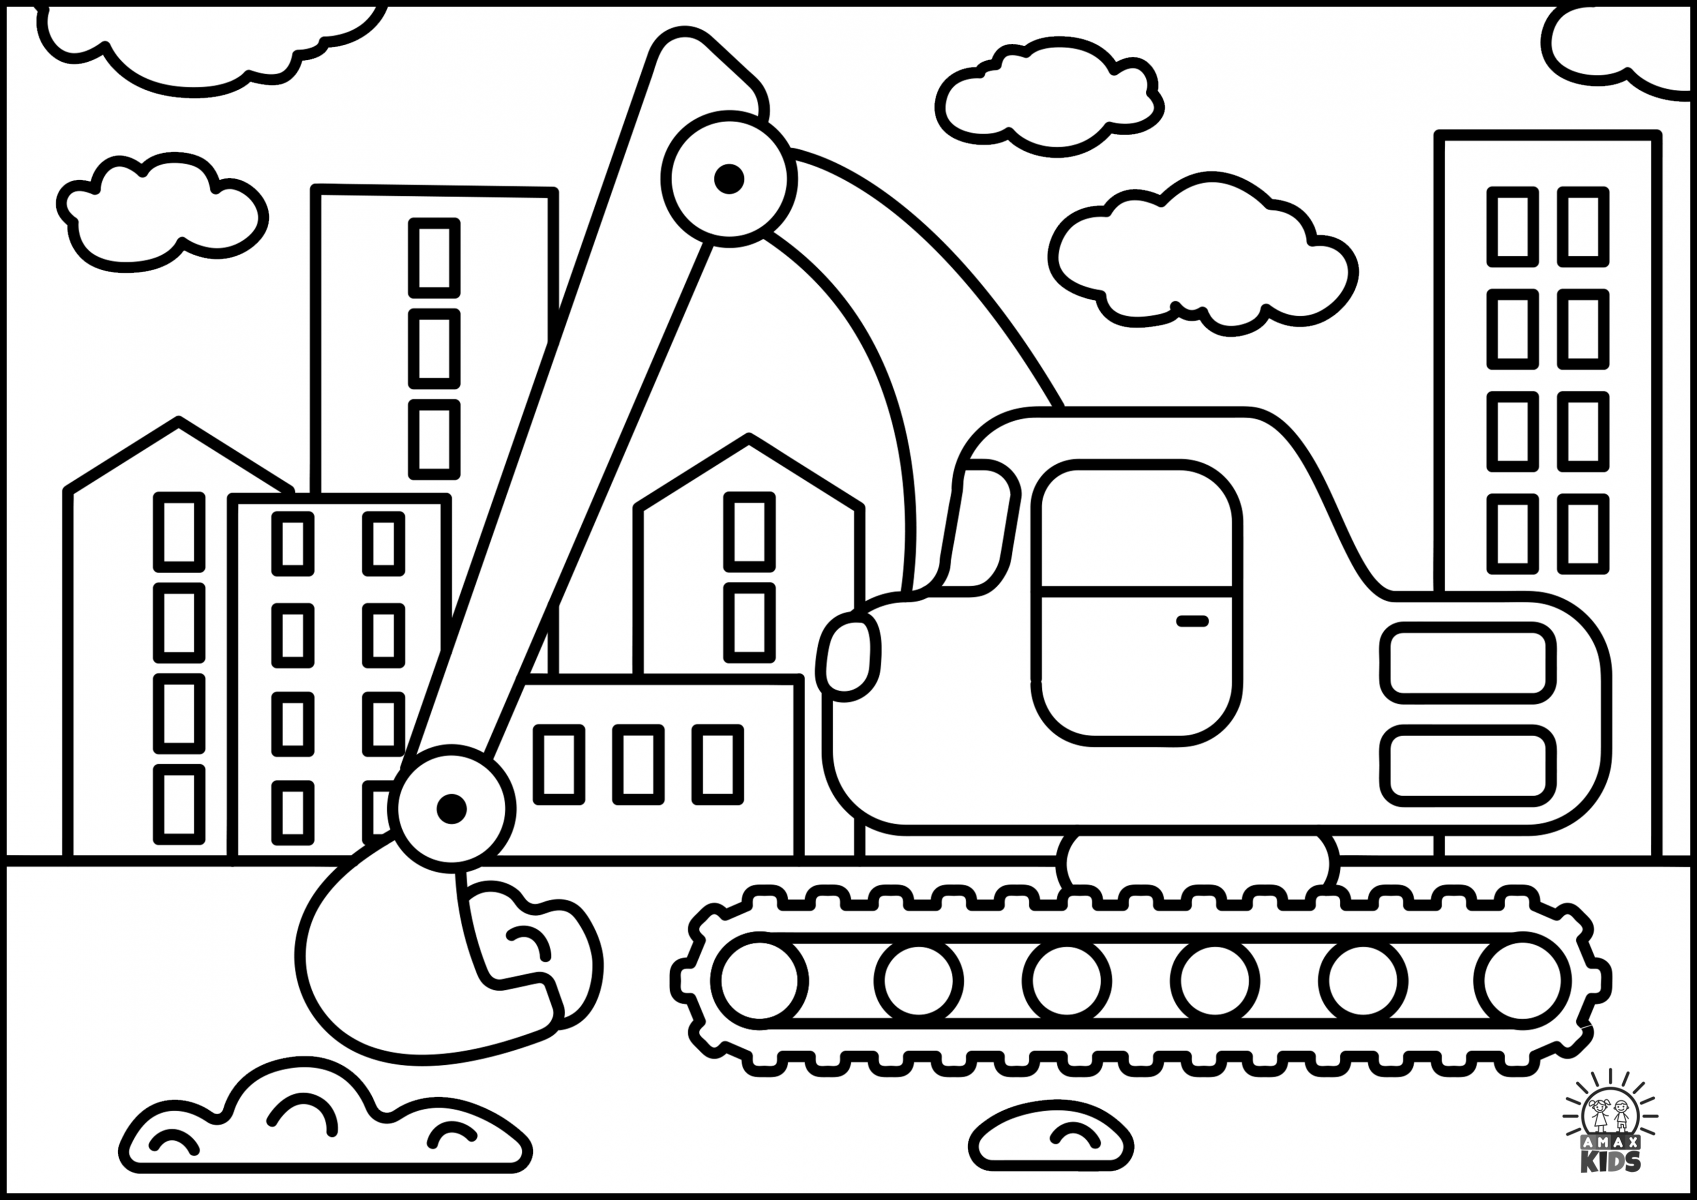 Coloring pages for kids with cars | Amax Kids